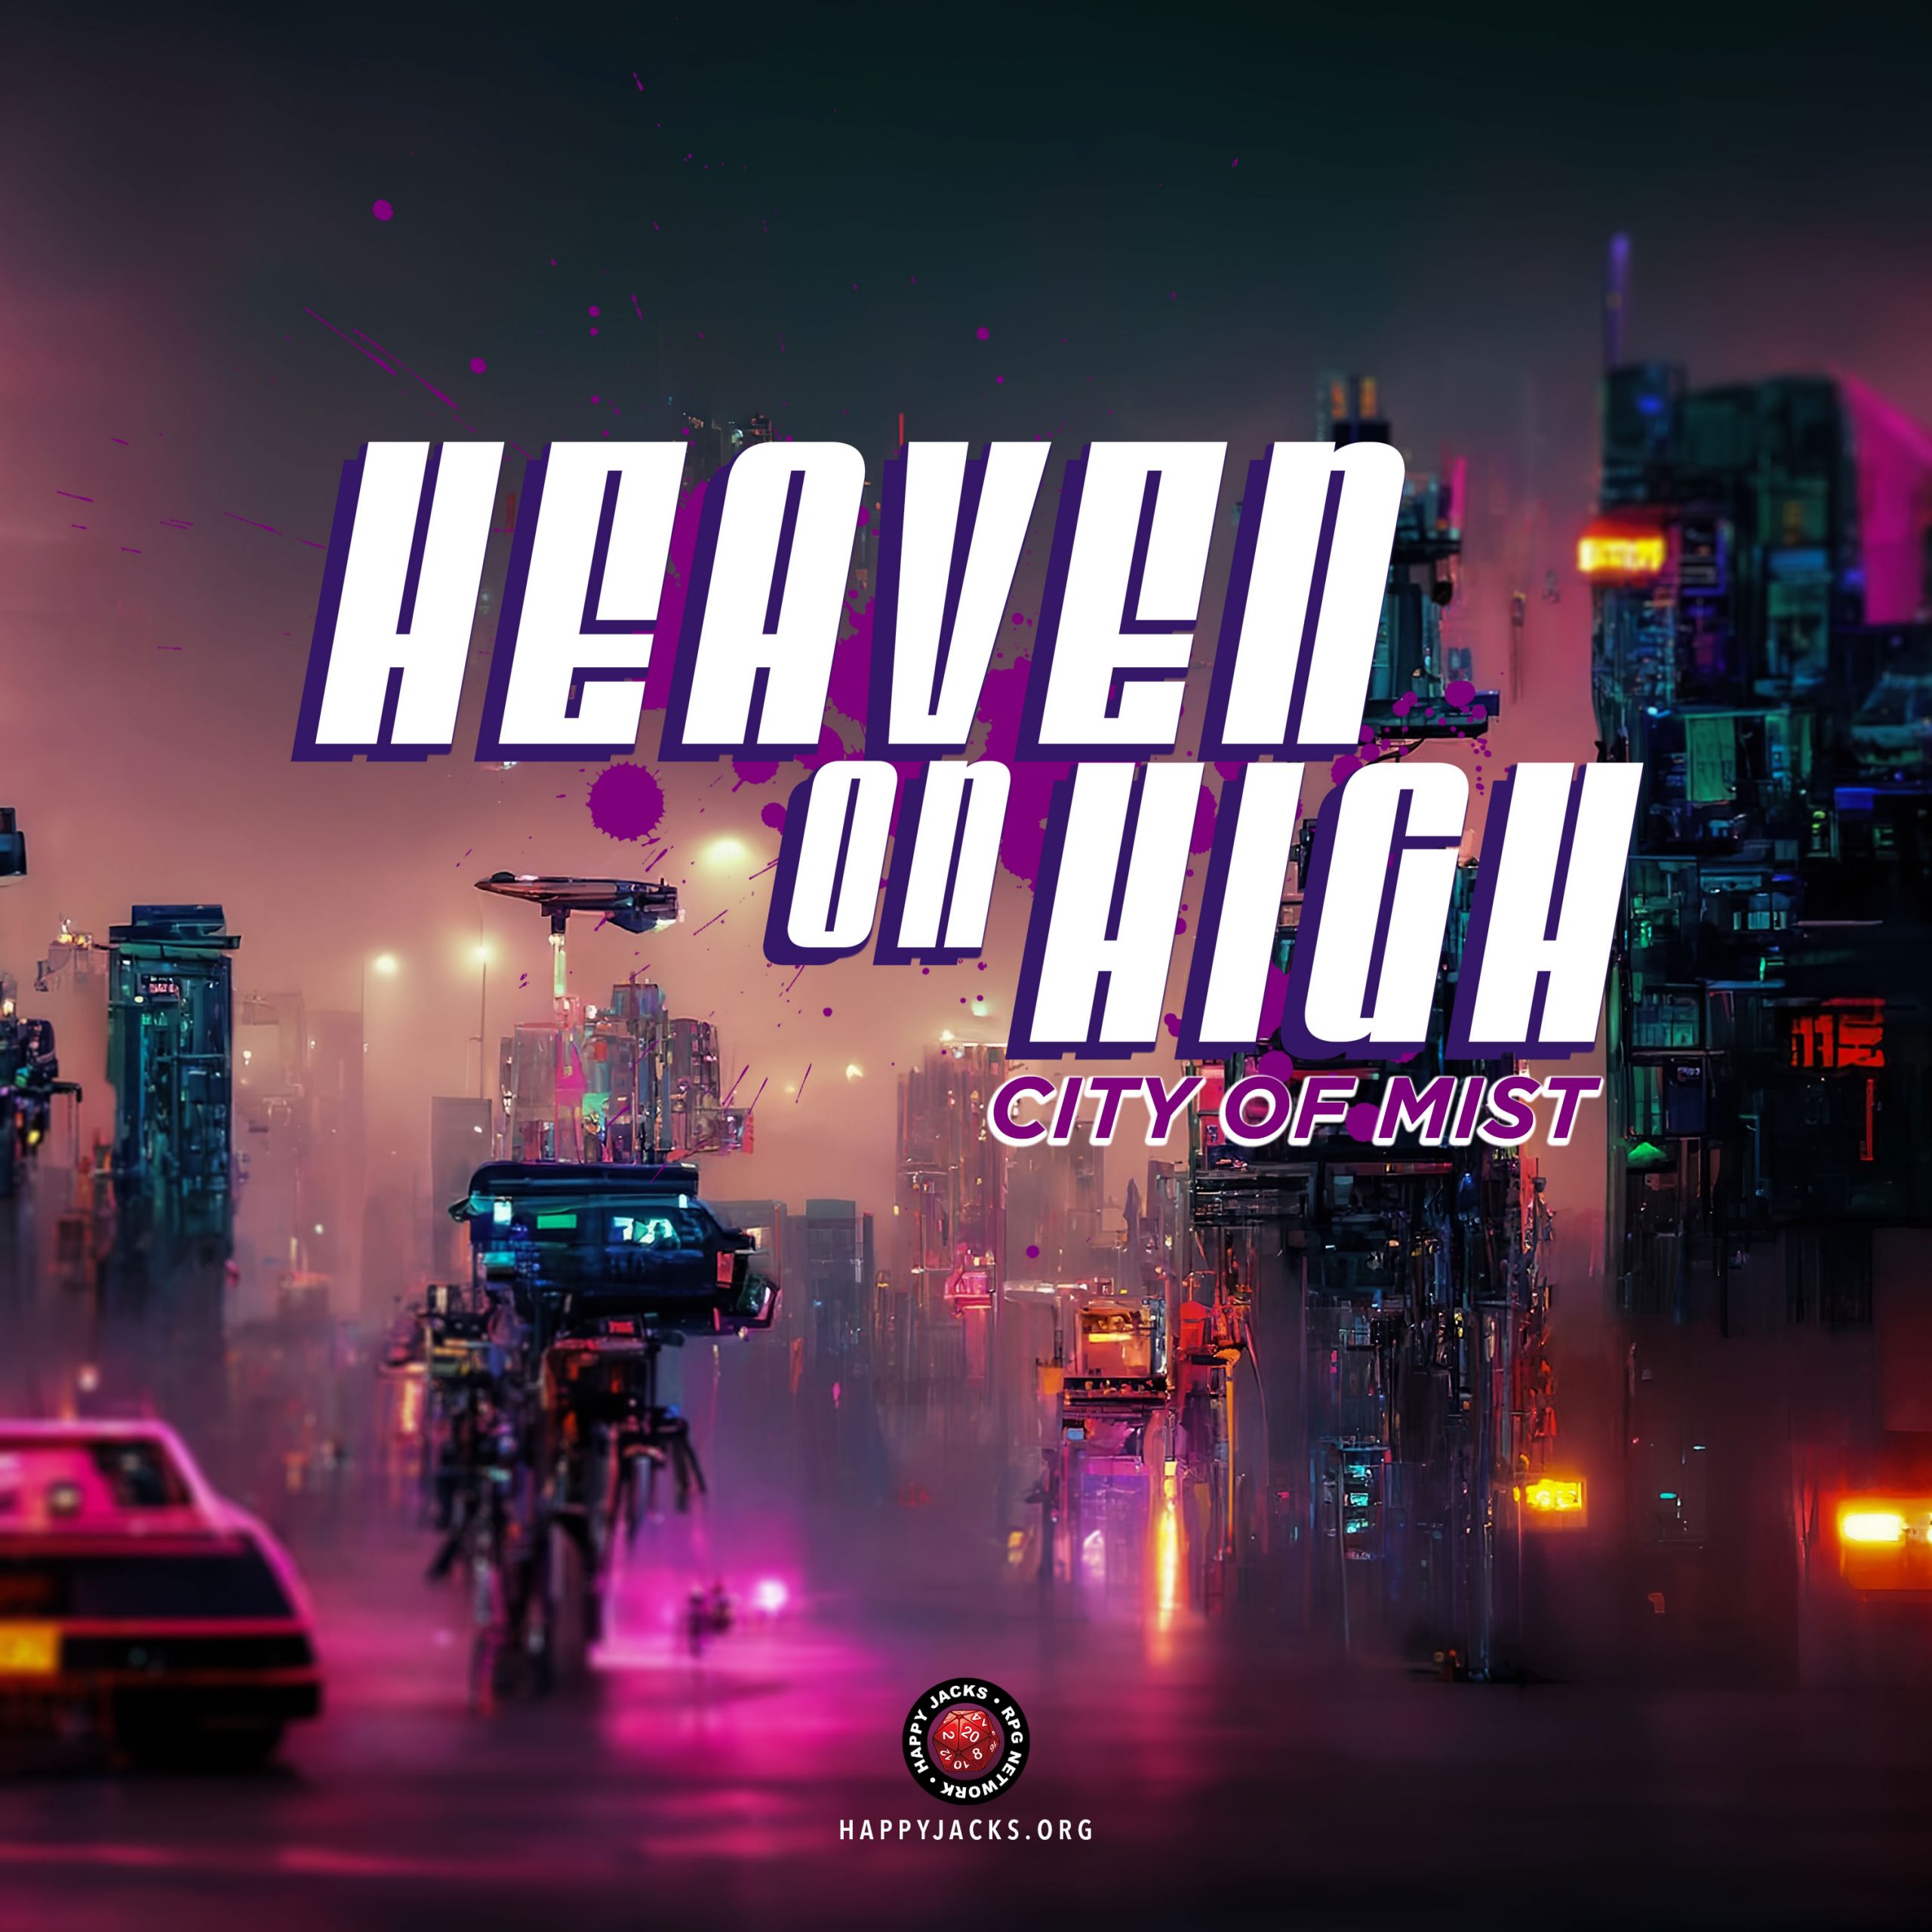 HEAVEN00 Character Creation | Heaven on High | City of Mist